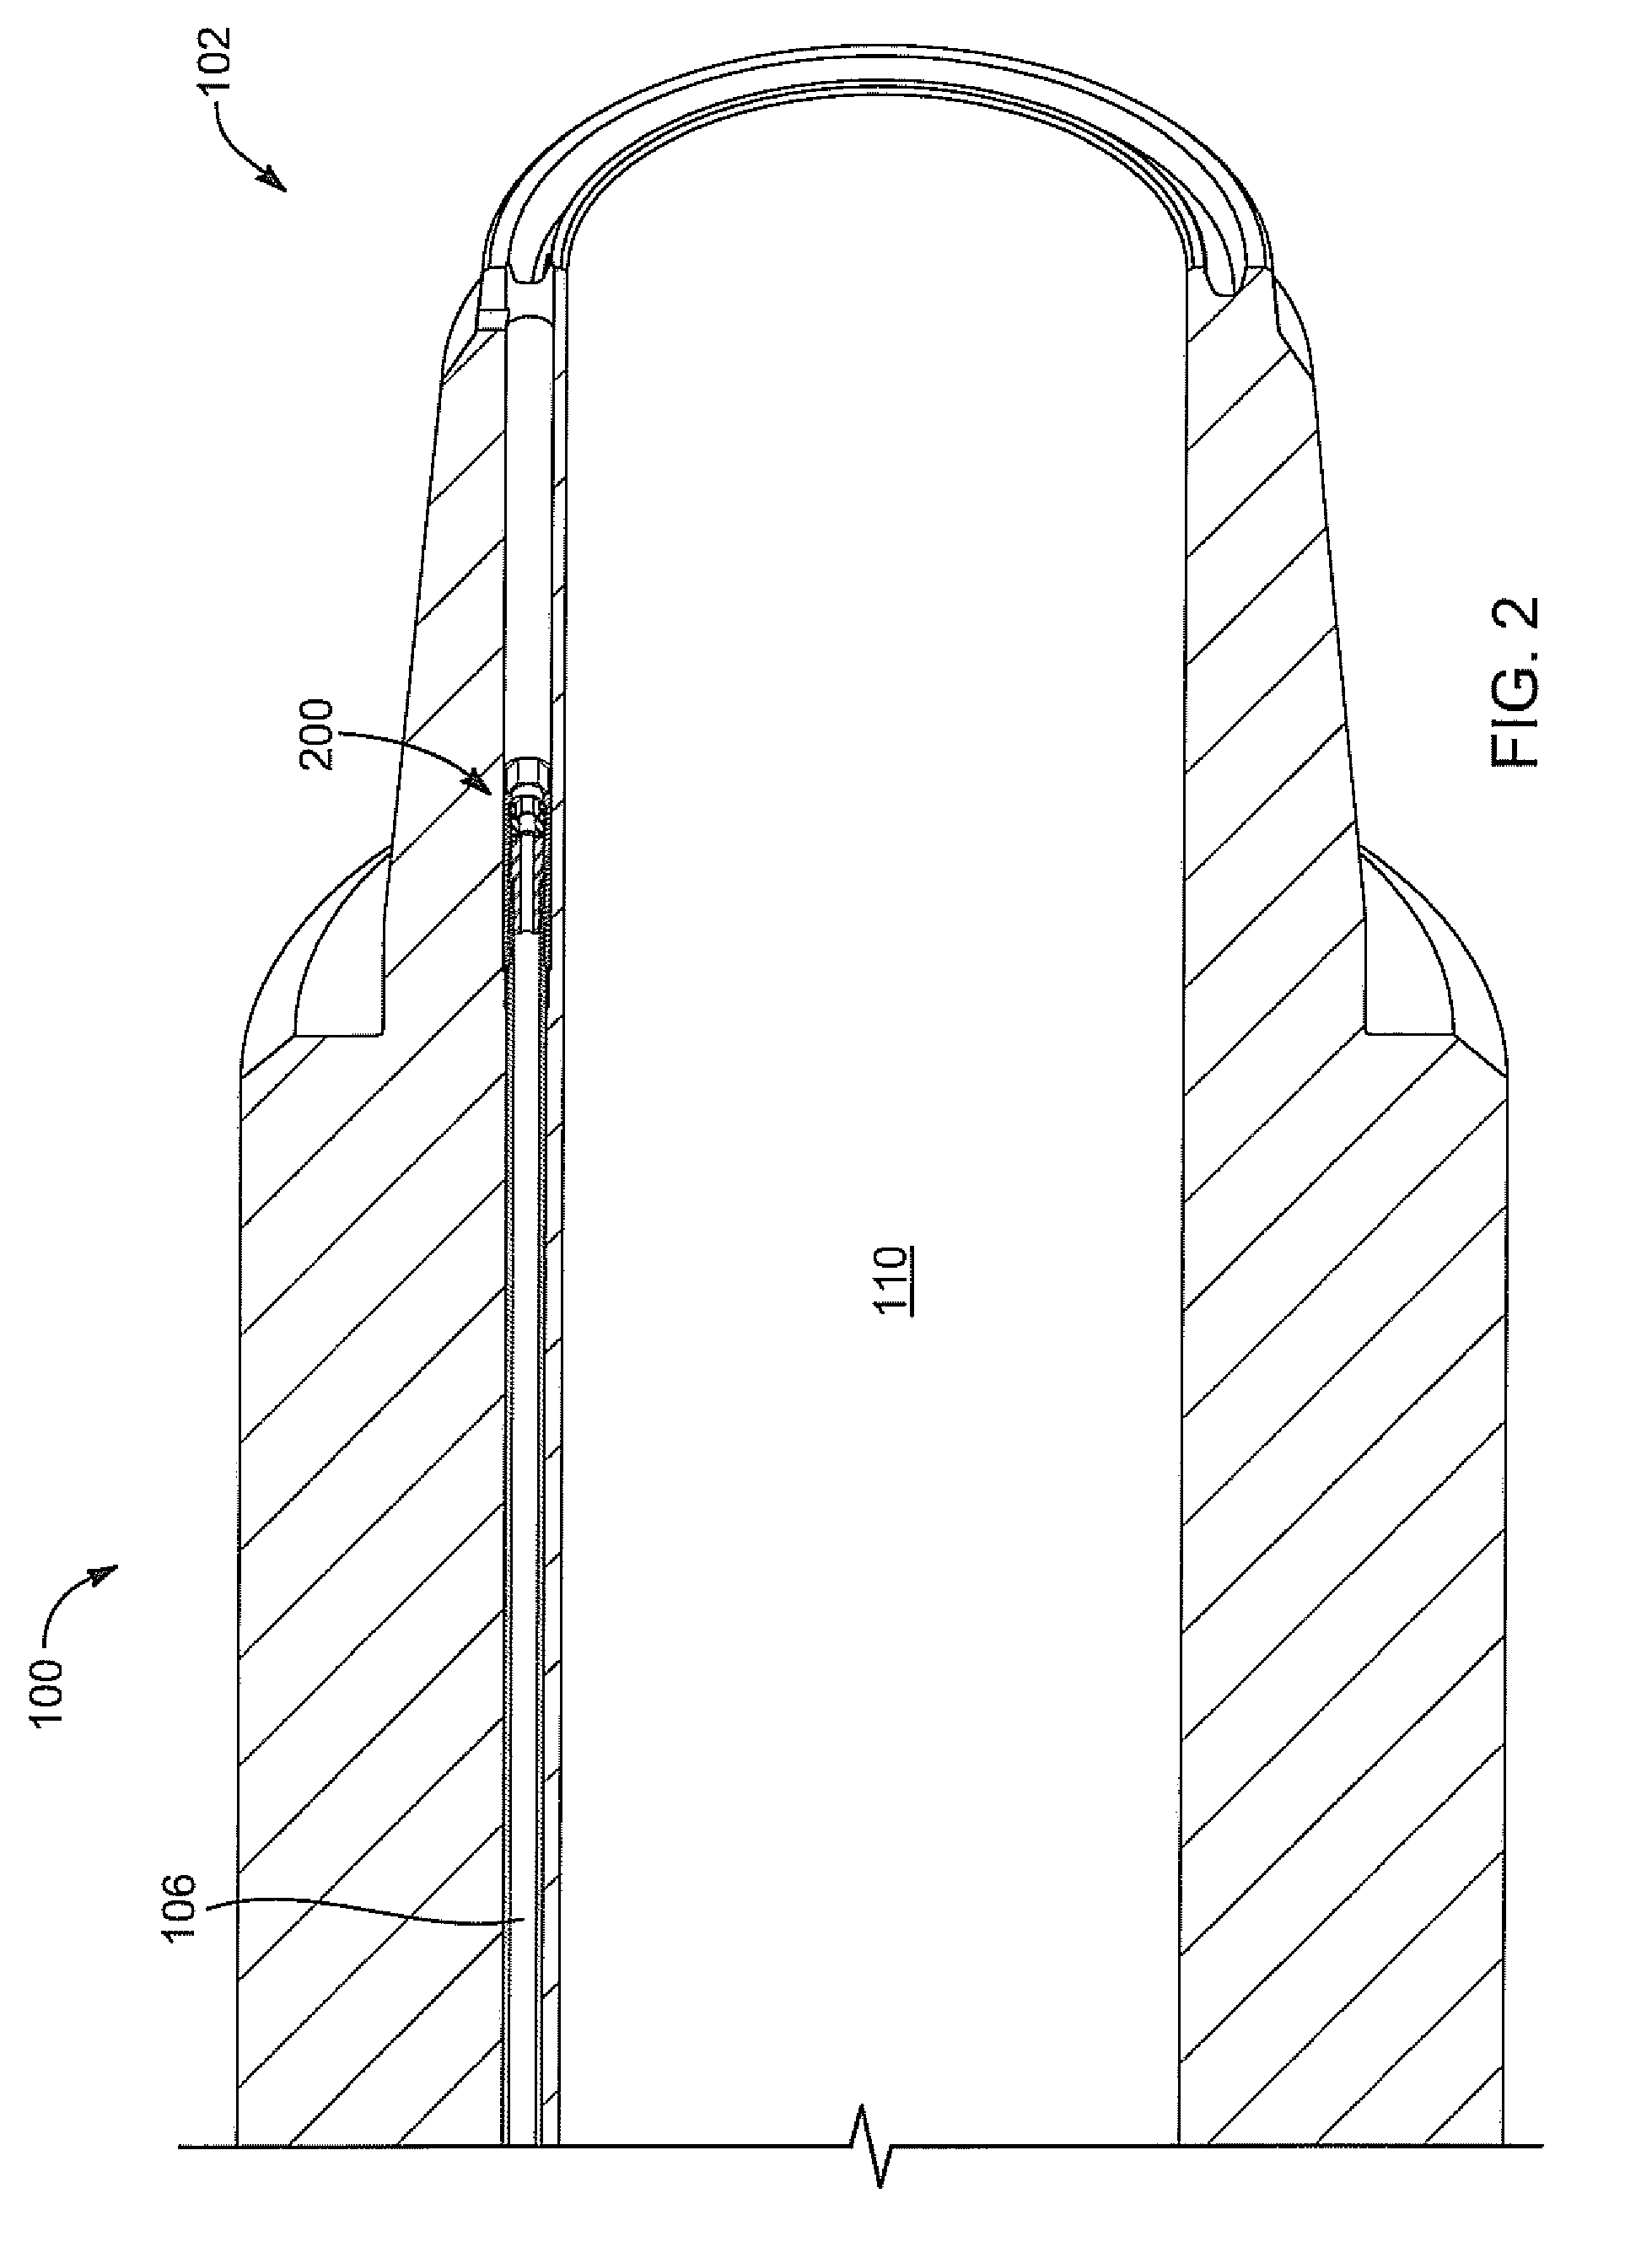 Threaded Retention Device for Downhole Transmission Lines